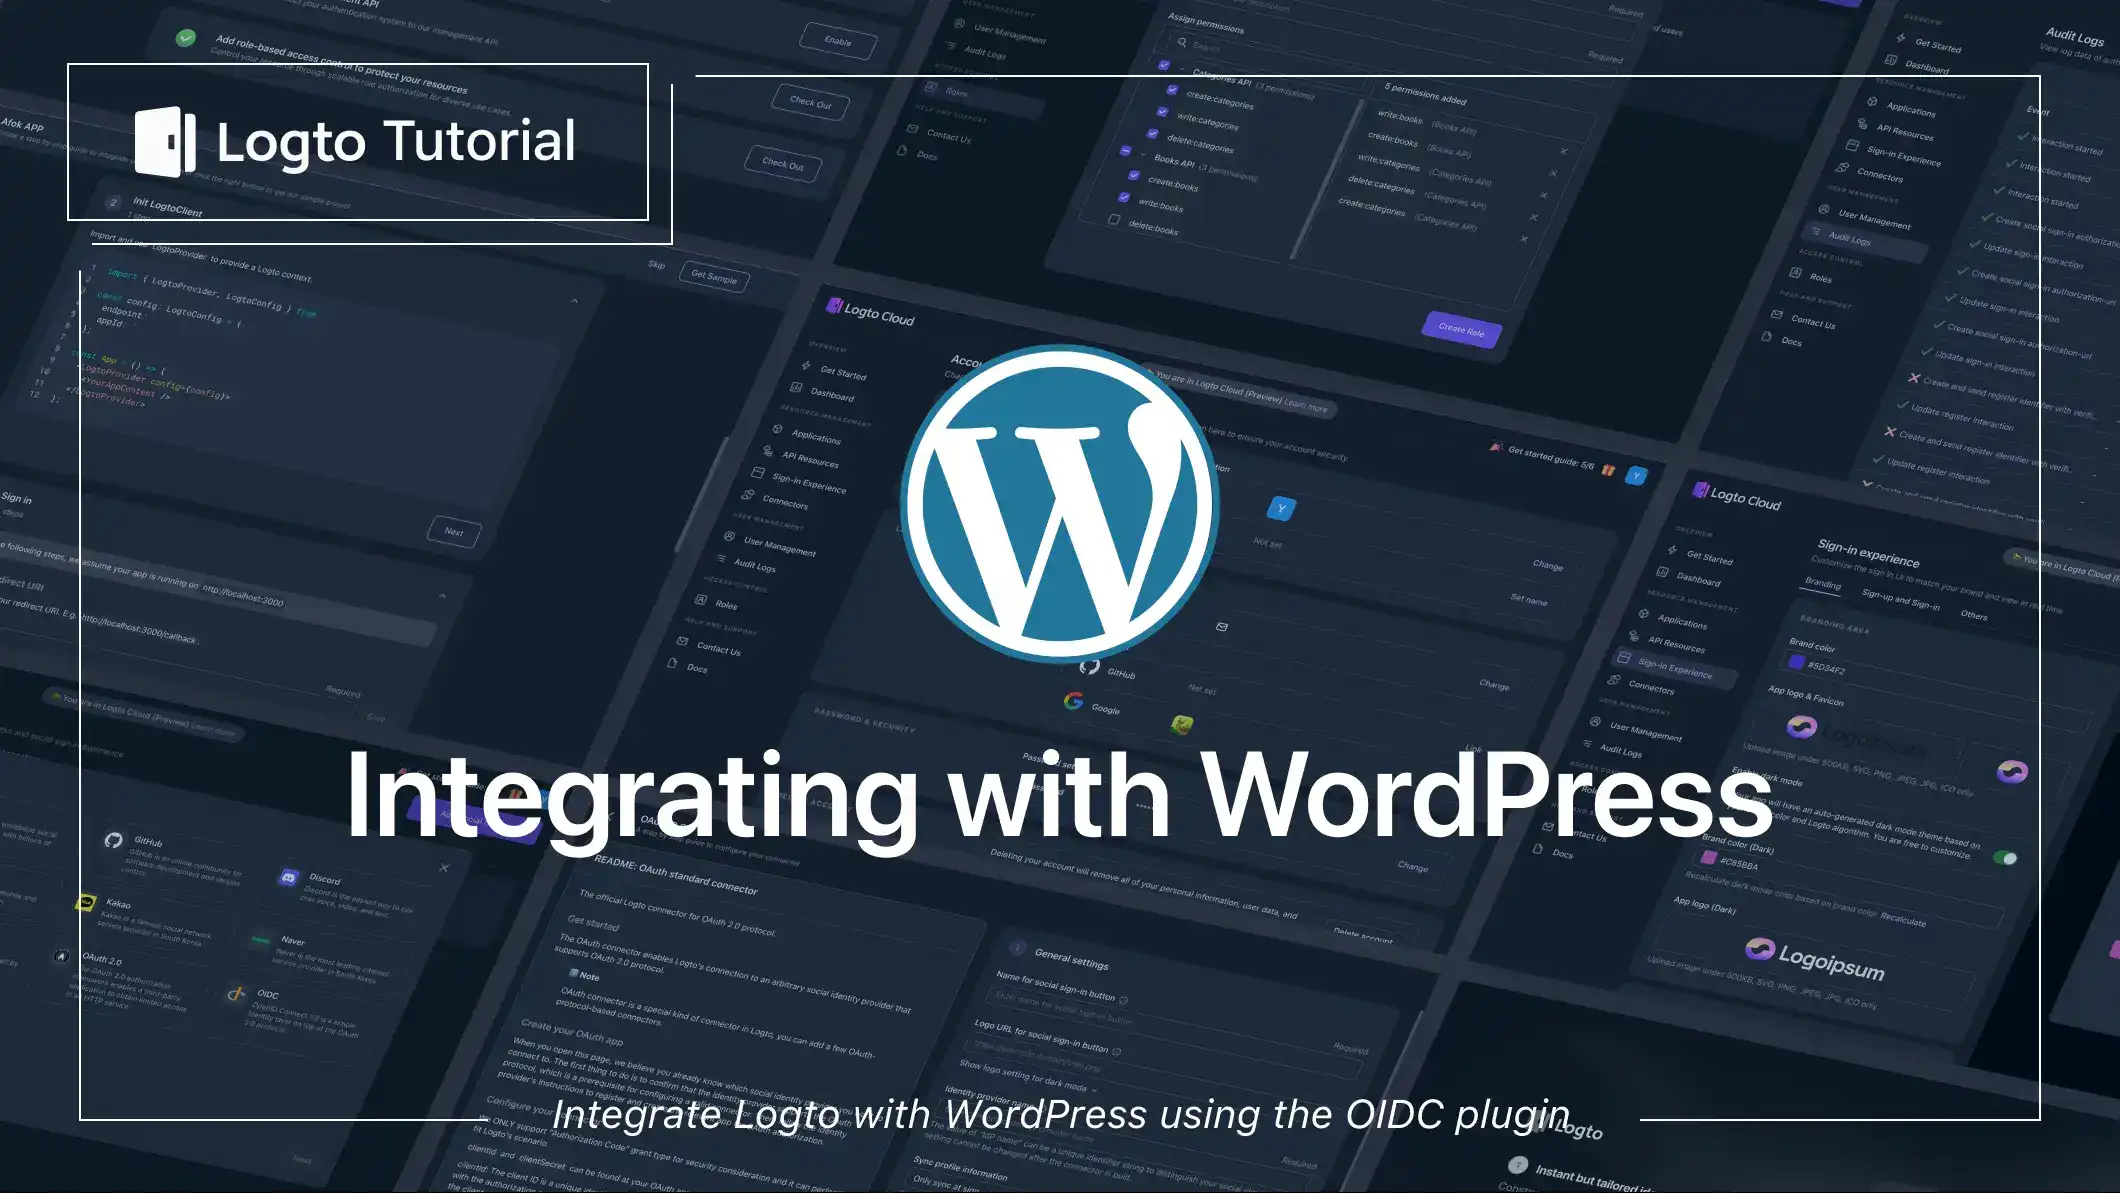 Integrating with WordPress for Authorization